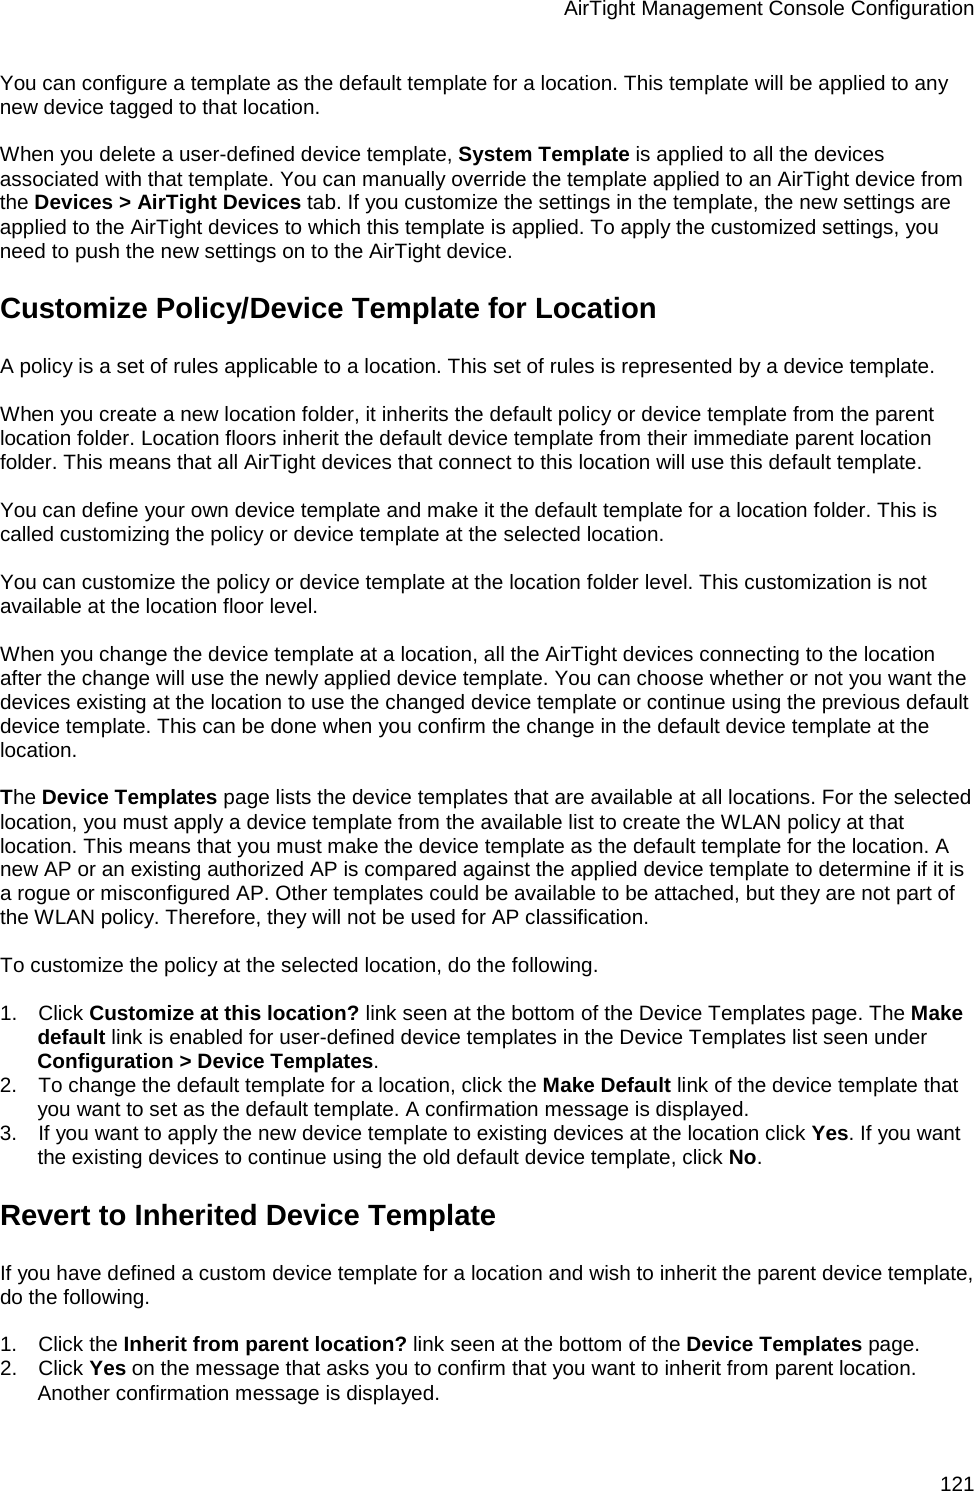 AirTight Management Console Configuration 121 You can configure a template as the default template for a location. This template will be applied to any new device tagged to that location.   When you delete a user-defined device template, System Template is applied to all the devices associated with that template. You can manually override the template applied to an AirTight device from the Devices &gt; AirTight Devices tab. If you customize the settings in the template, the new settings are applied to the AirTight devices to which this template is applied. To apply the customized settings, you need to push the new settings on to the AirTight device. Customize Policy/Device Template for Location A policy is a set of rules applicable to a location. This set of rules is represented by a device template.   When you create a new location folder, it inherits the default policy or device template from the parent location folder. Location floors inherit the default device template from their immediate parent location folder. This means that all AirTight devices that connect to this location will use this default template.   You can define your own device template and make it the default template for a location folder. This is called customizing the policy or device template at the selected location.    You can customize the policy or device template at the location folder level. This customization is not available at the location floor level.   When you change the device template at a location, all the AirTight devices connecting to the location after the change will use the newly applied device template. You can choose whether or not you want the devices existing at the location to use the changed device template or continue using the previous default device template. This can be done when you confirm the change in the default device template at the location.   The Device Templates page lists the device templates that are available at all locations. For the selected location, you must apply a device template from the available list to create the WLAN policy at that location. This means that you must make the device template as the default template for the location. A new AP or an existing authorized AP is compared against the applied device template to determine if it is a rogue or misconfigured AP. Other templates could be available to be attached, but they are not part of the WLAN policy. Therefore, they will not be used for AP classification.   To customize the policy at the selected location, do the following.   1.      Click Customize at this location? link seen at the bottom of the Device Templates page. The Make default link is enabled for user-defined device templates in the Device Templates list seen under Configuration &gt; Device Templates. 2.      To change the default template for a location, click the Make Default link of the device template that you want to set as the default template. A confirmation message is displayed. 3.      If you want to apply the new device template to existing devices at the location click Yes. If you want the existing devices to continue using the old default device template, click No. Revert to Inherited Device Template If you have defined a custom device template for a location and wish to inherit the parent device template, do the following.   1.      Click the Inherit from parent location? link seen at the bottom of the Device Templates page. 2.      Click Yes on the message that asks you to confirm that you want to inherit from parent location. Another confirmation message is displayed. 